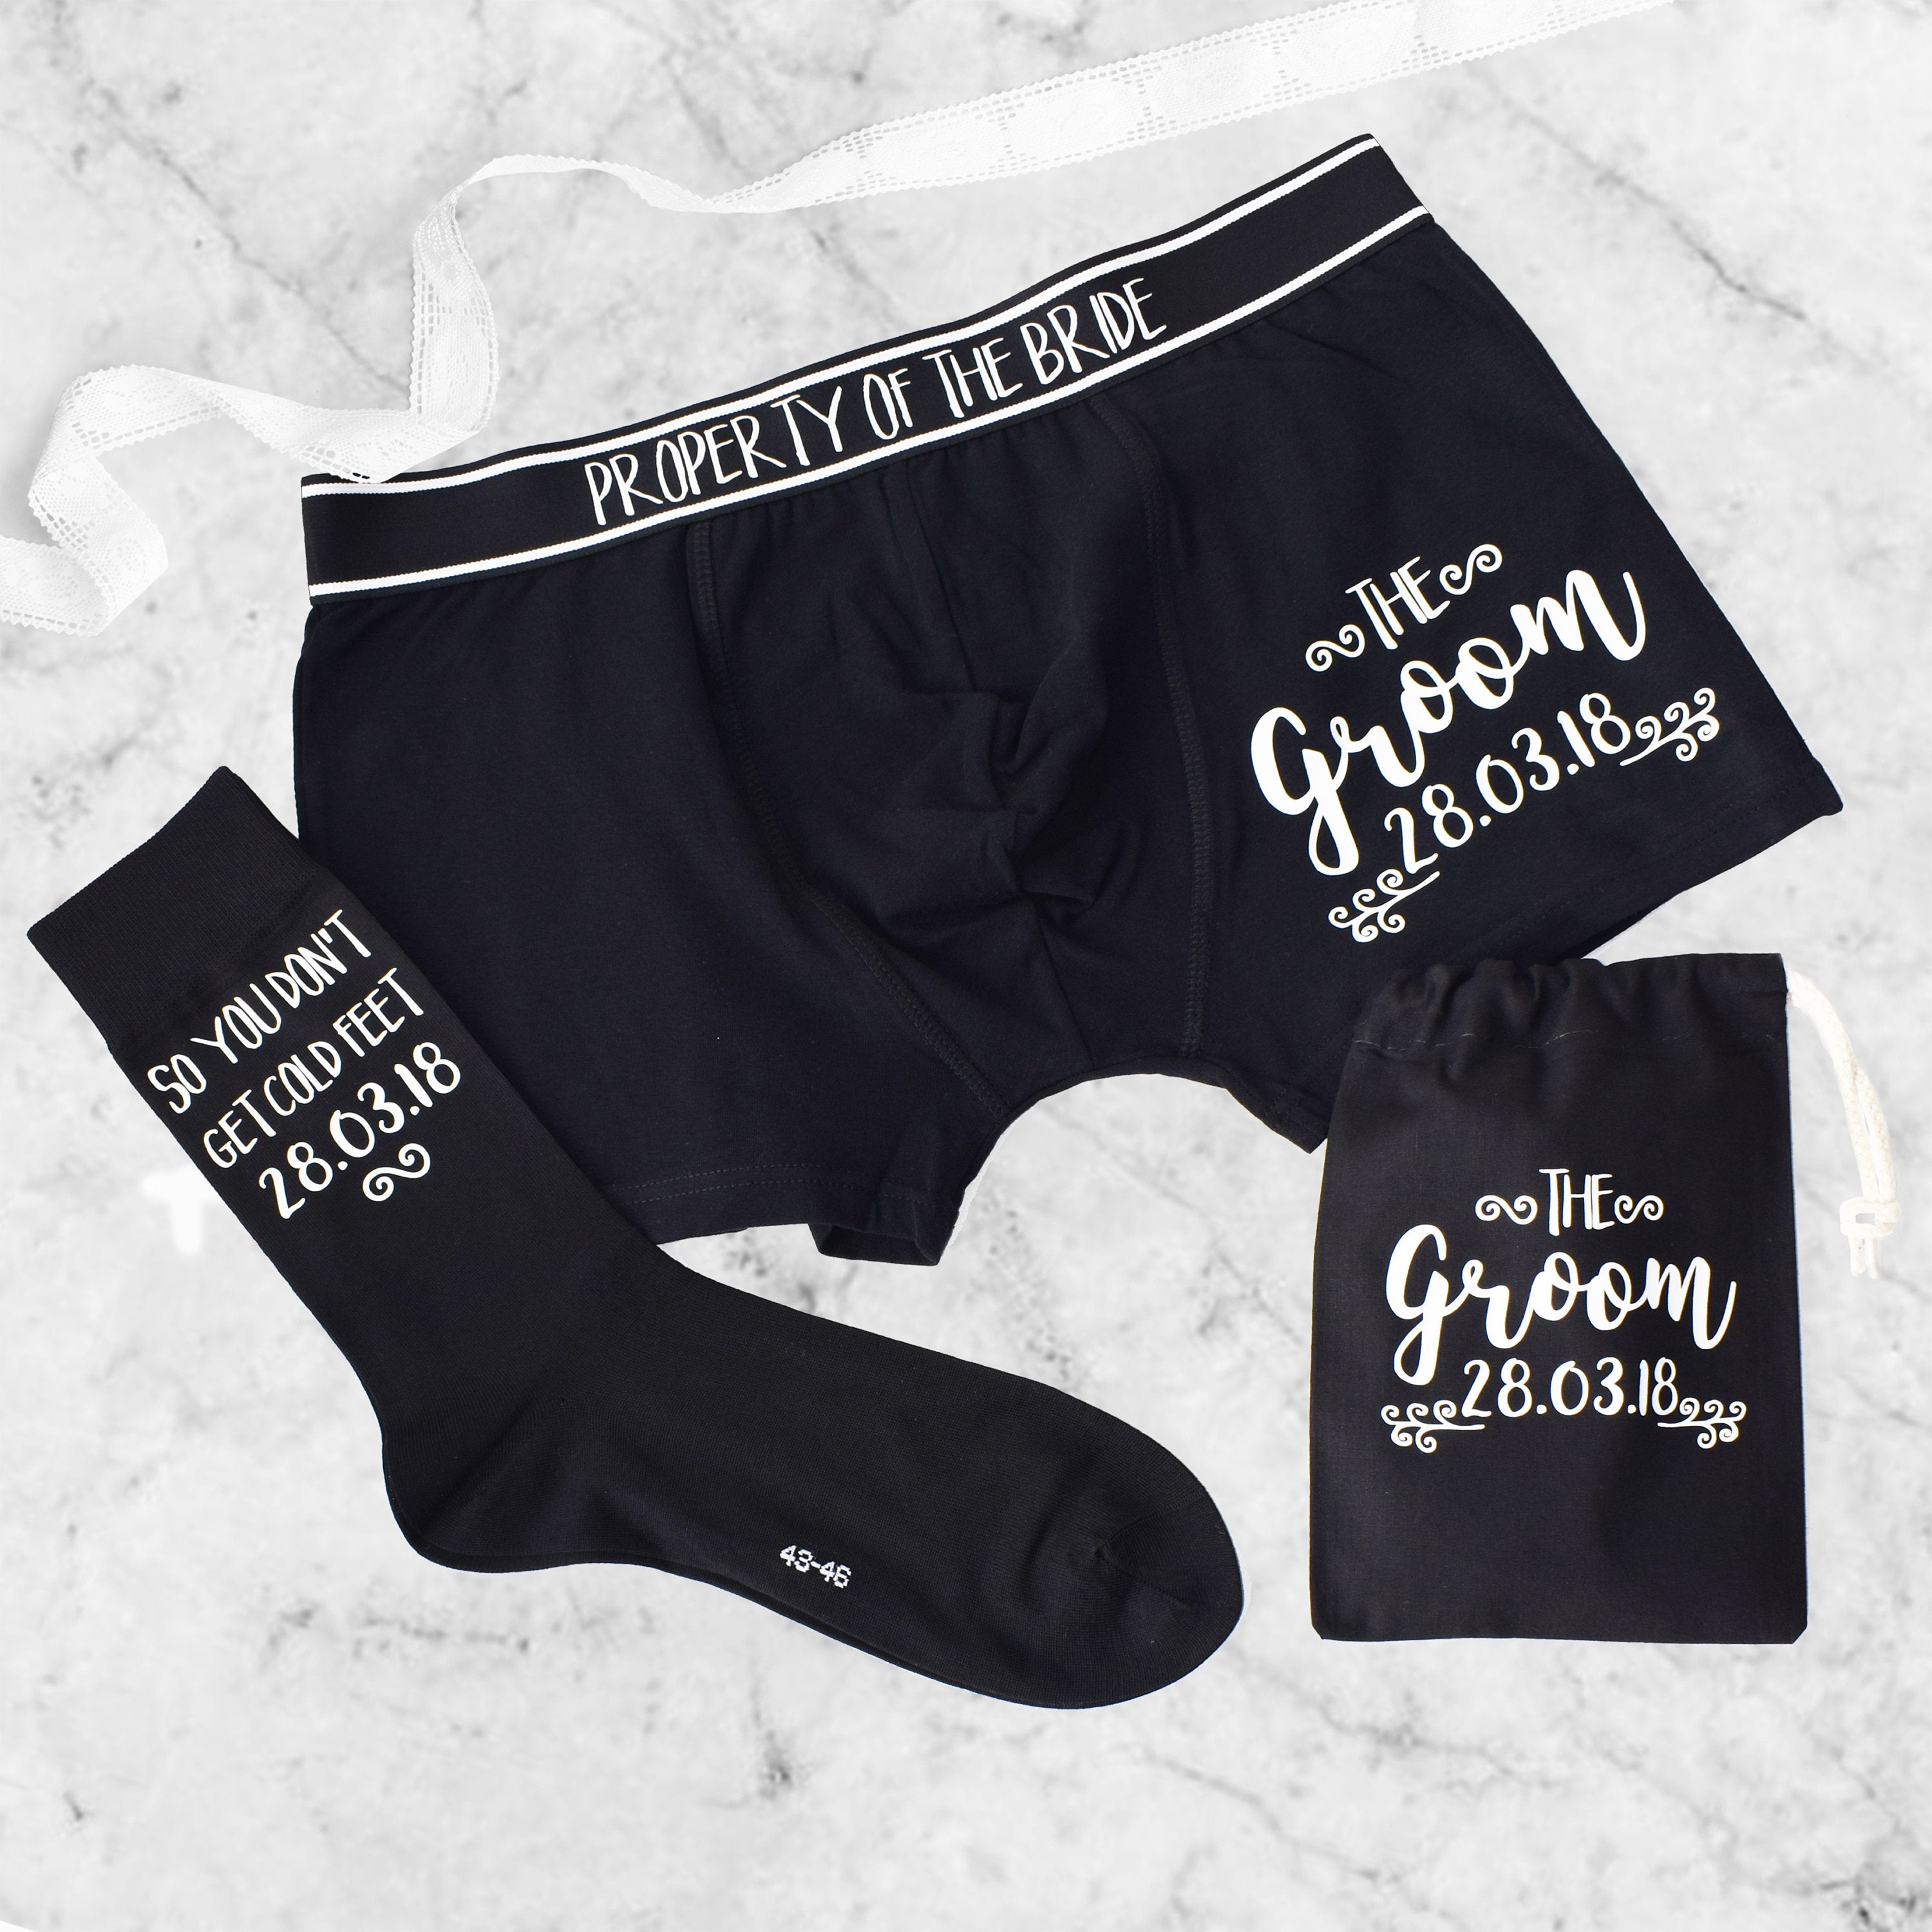 So You Don't Get Cold Feet,Property of the bride, Personalised Grooms Boxers Underwear Set